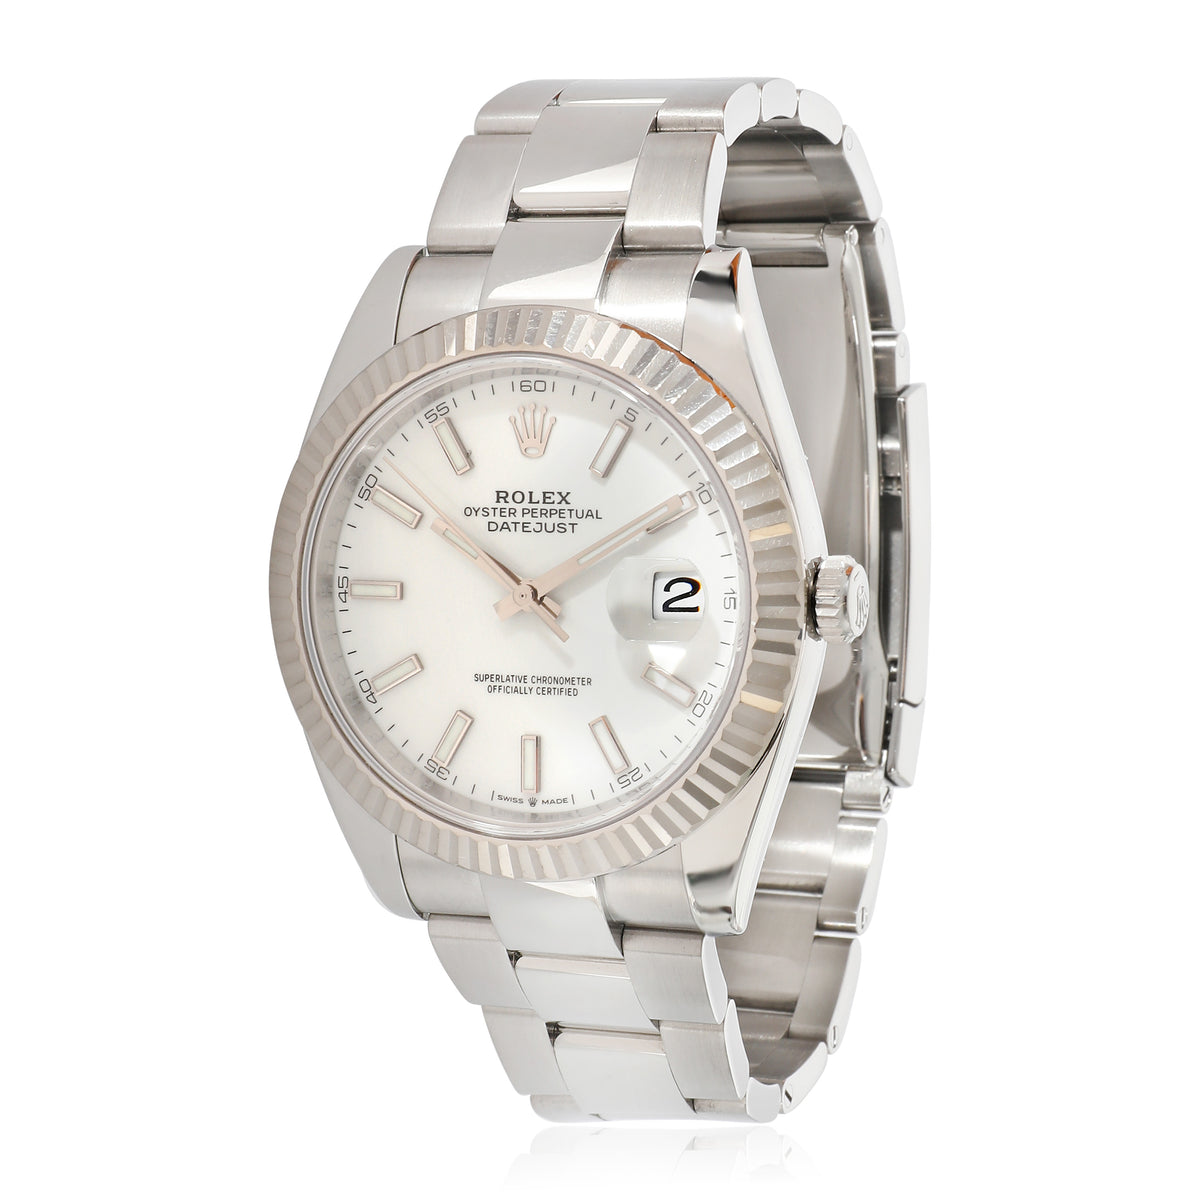 Datejust 41 126334 Men's Watch in 18kt Stainless Steel/White Gold